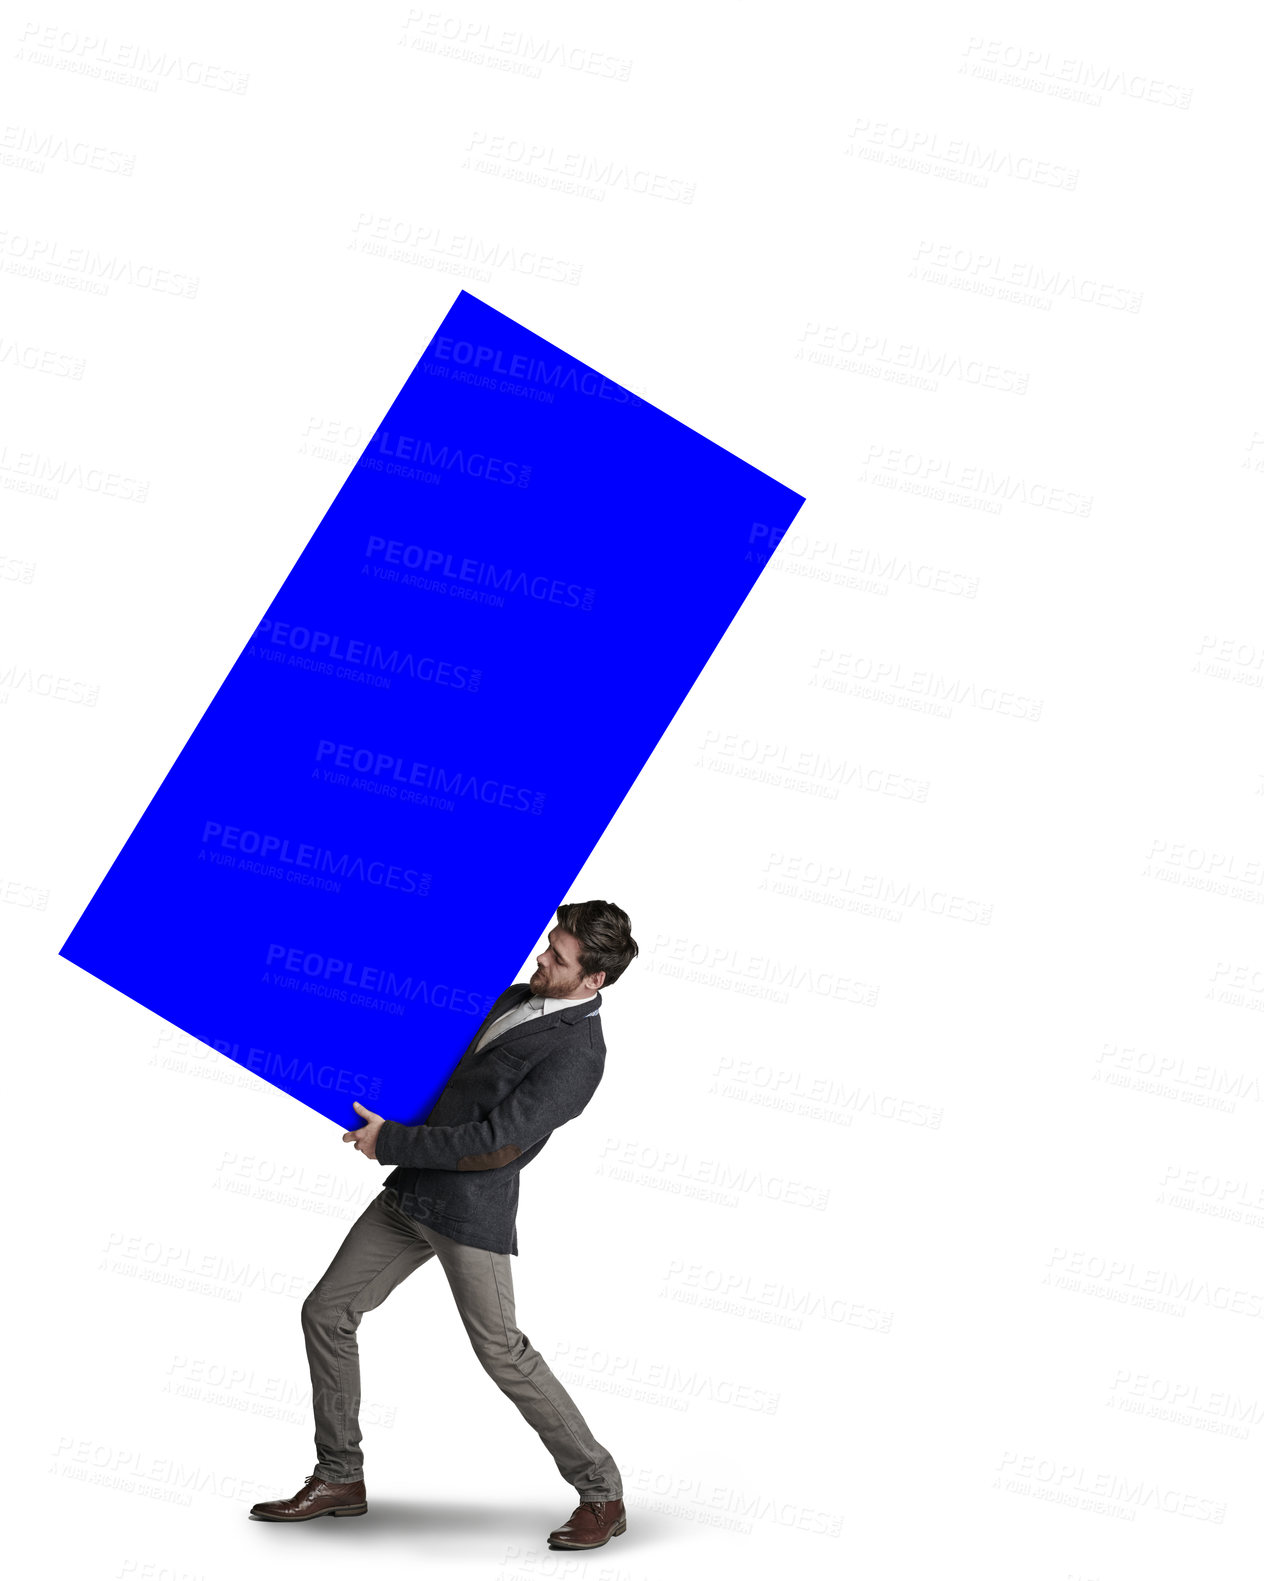 Buy stock photo Shot of a businessman carrying a heavy load against a white background